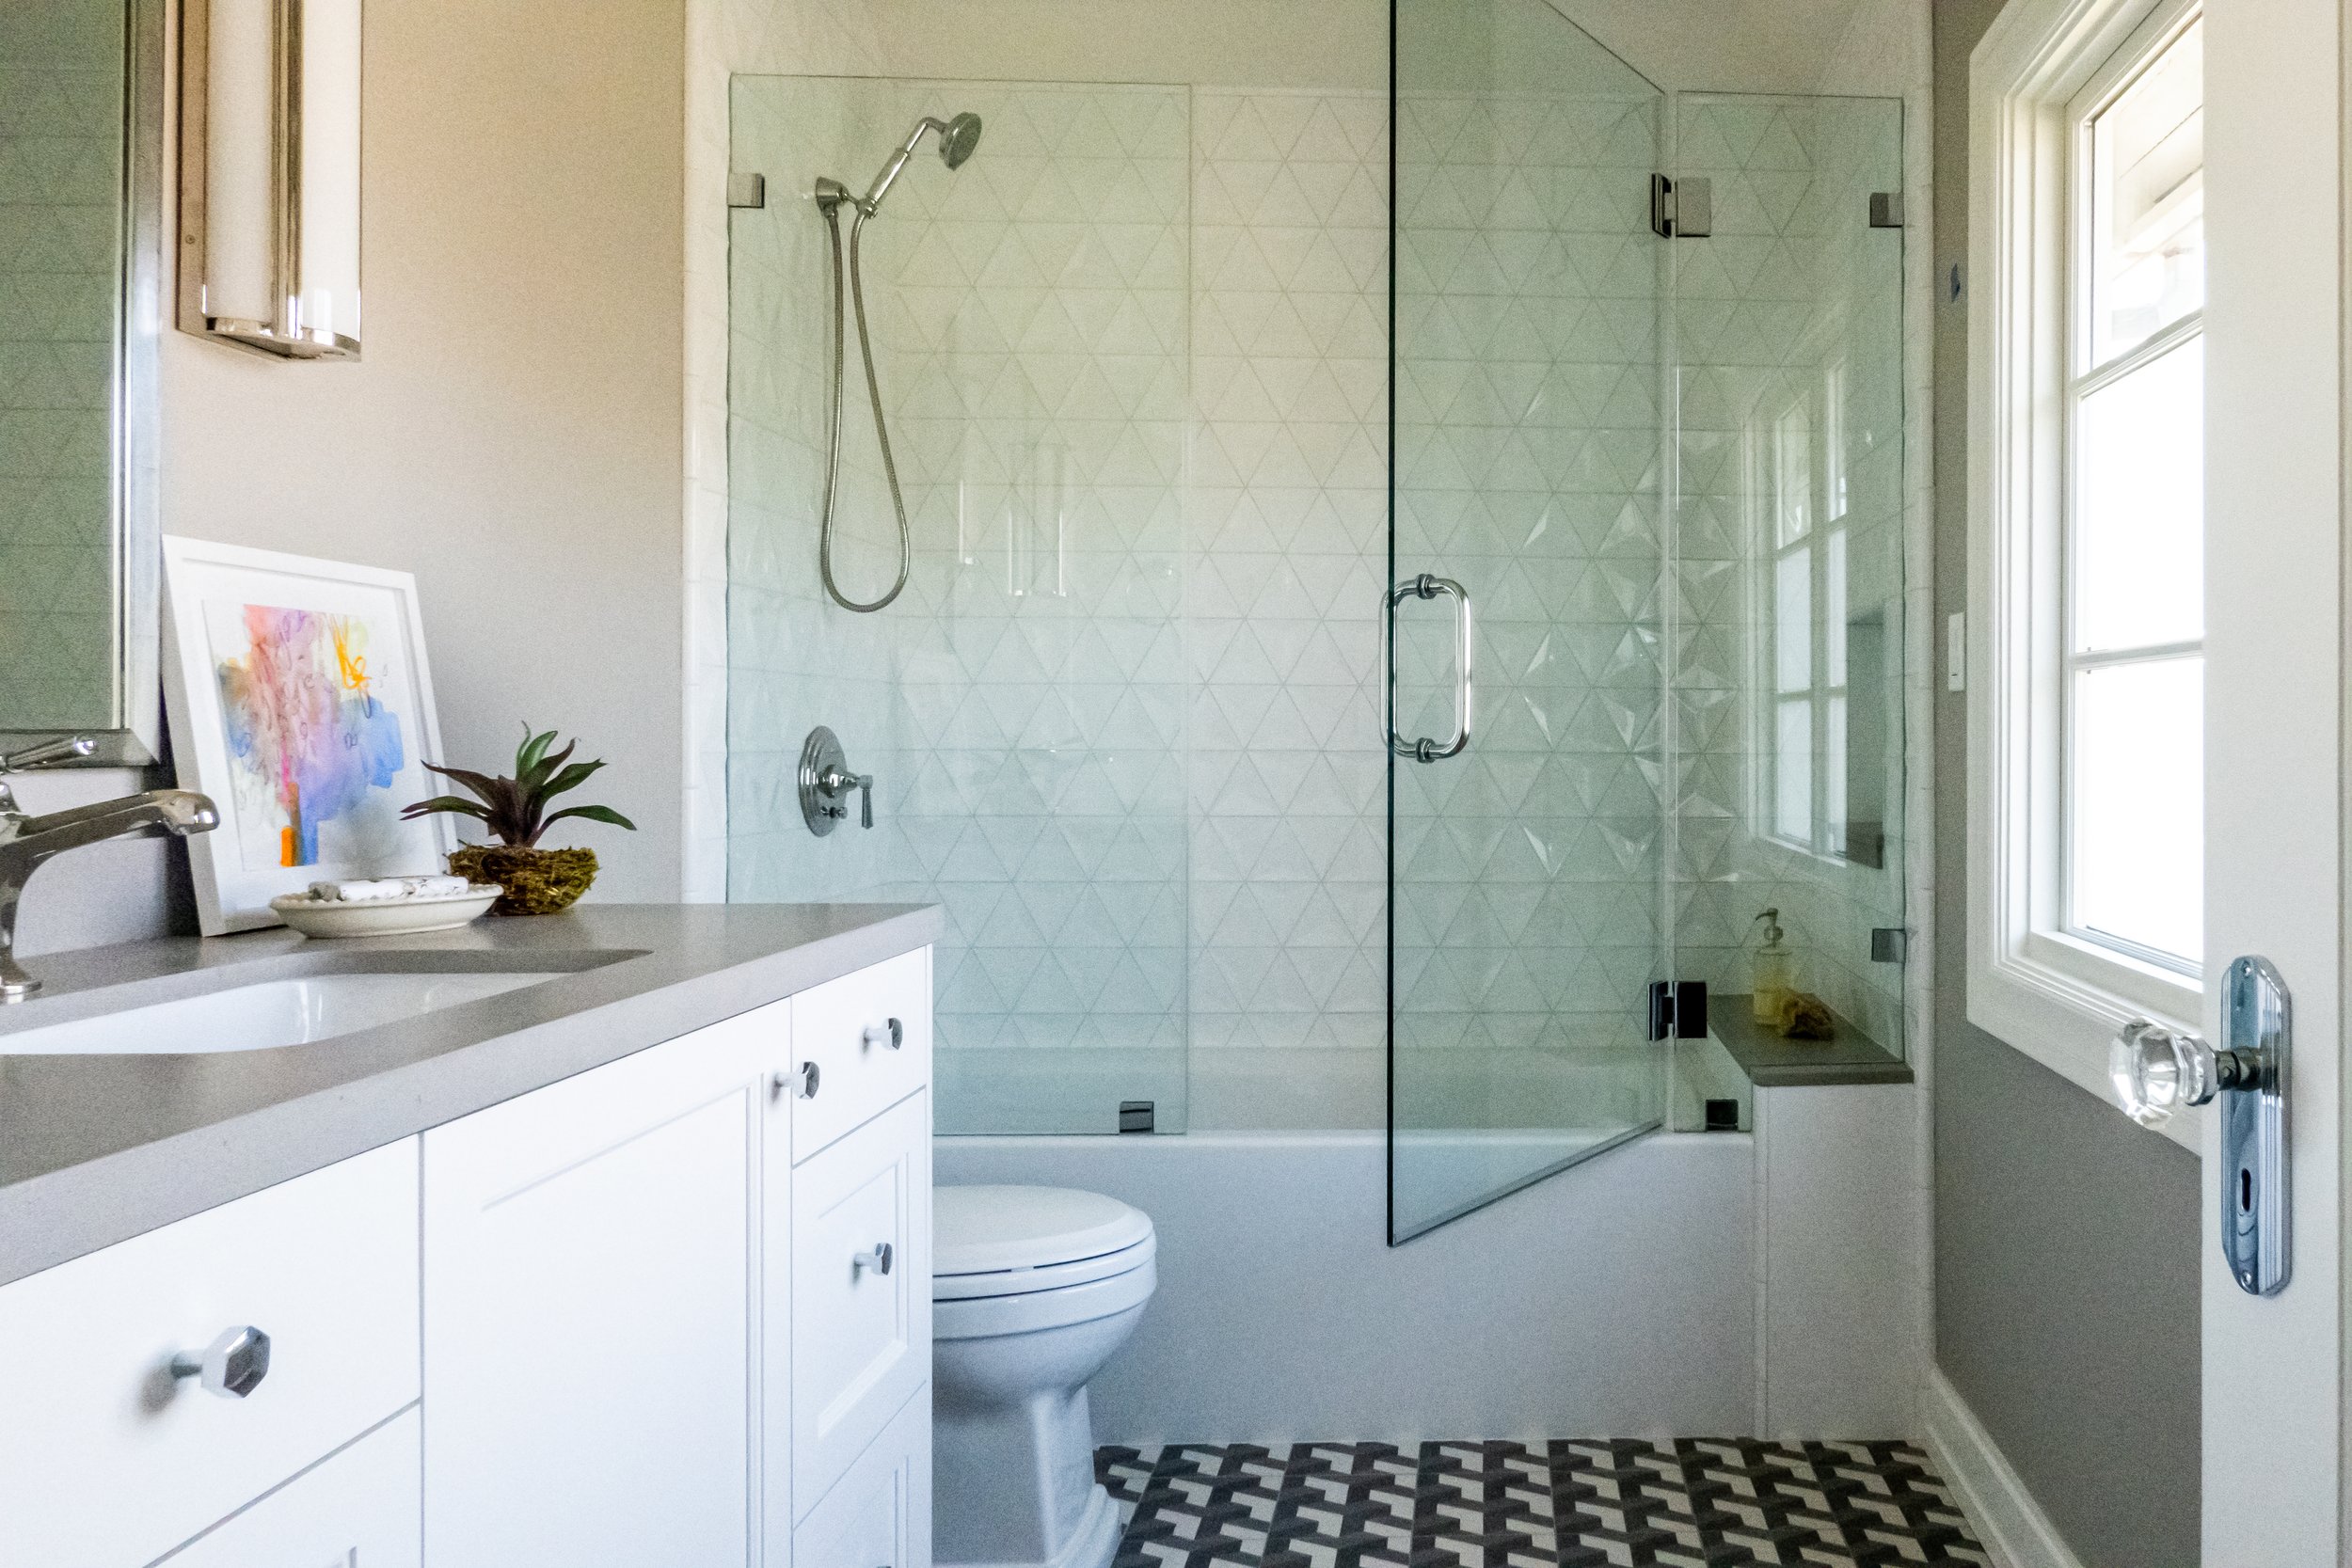 bathroom remodeling austin</span></div>Finally, do not ignore storage. Analyze your storage space needs and incorporate options that make best use of room and company. Take into consideration alternatives such as built-in shelving, vanity closets, or wall-mounted storage systems.<br><br><br><h2>Just How to Choose the Right Shower Room Fixtures and Products</h2><br><br>To ensure a successful bathroom remodel, it is crucial to very carefully choose the right washroom fixtures and materials. The products and components you select play a substantial role in both the aesthetic charm and capability of your bathroom. It is vital to make enlightened choices based on your individual choices, budget, and the overall style you want to accomplish.<br><br><br>When choosing restroom fixtures, think about the kind and style that ideal suits your requirements. Furthermore, take into consideration the top quality and sturdiness of the components.<br><br><br>Porcelain floor tiles are a popular selection for restroom floor covering due to their water resistance and ease of upkeep. Furthermore, take into consideration the shade and texture of materials to produce the wanted setting in your restroom.<br><br><br><div itemscope itemtype=